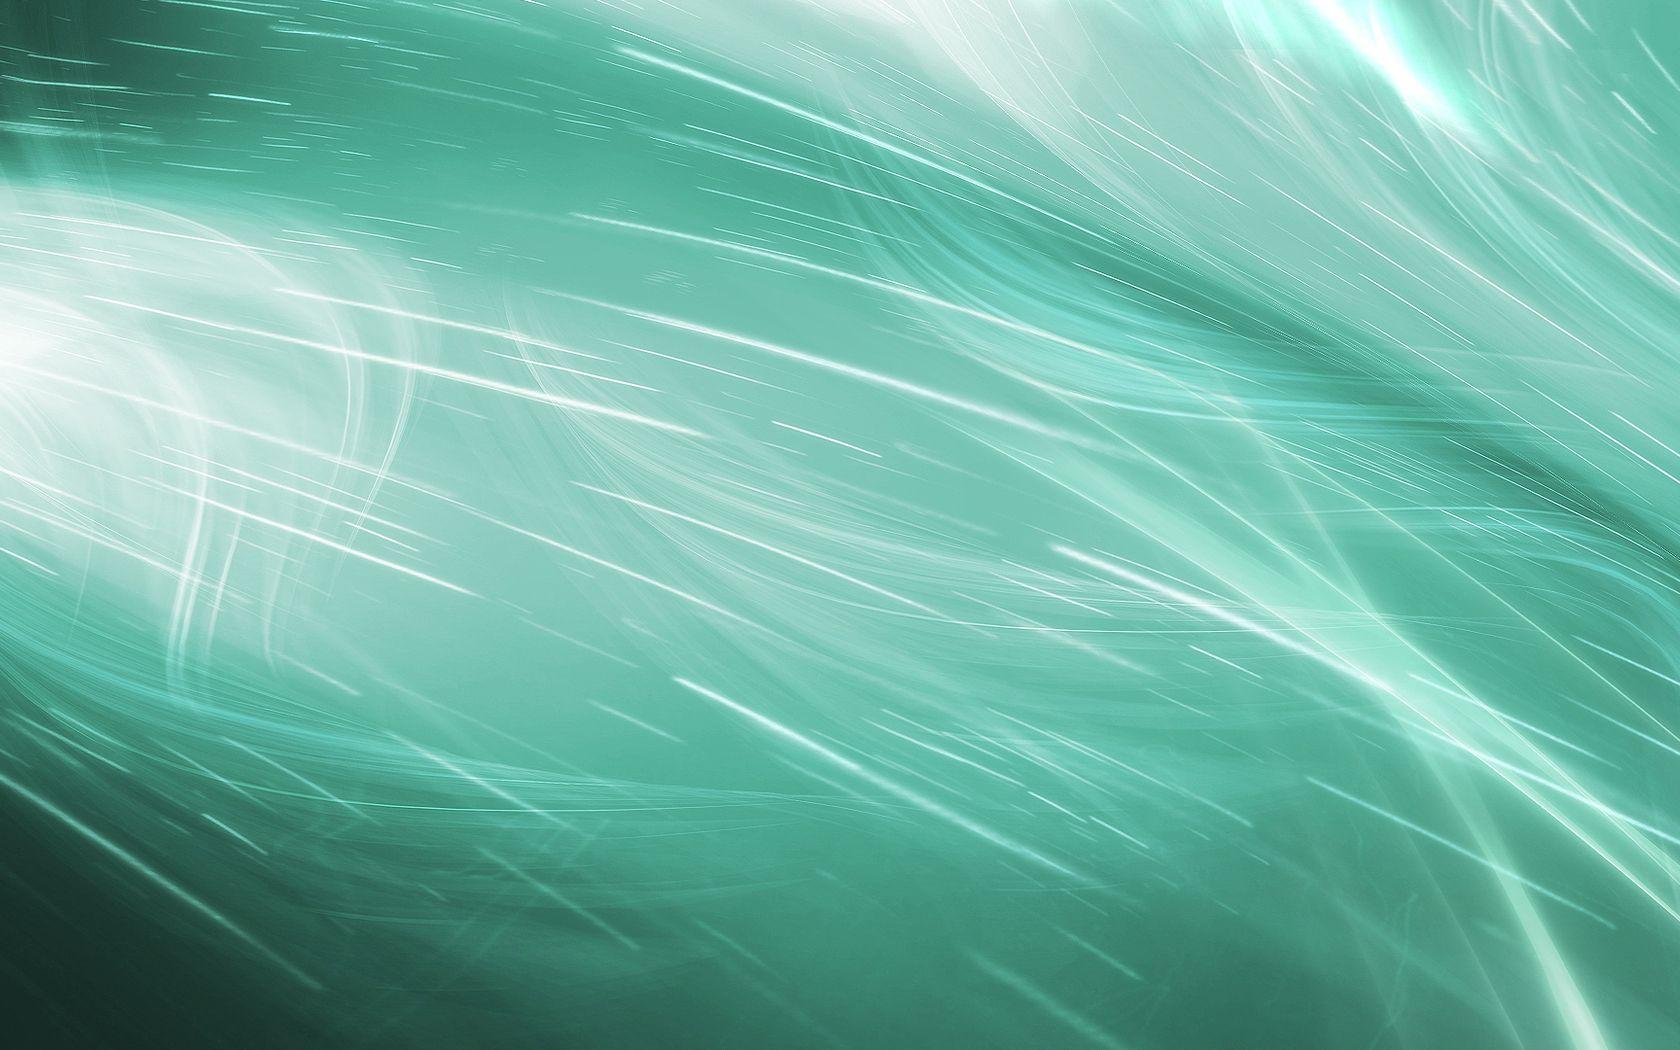 Wind Abstract Wallpaper 29107 1680x1050 px